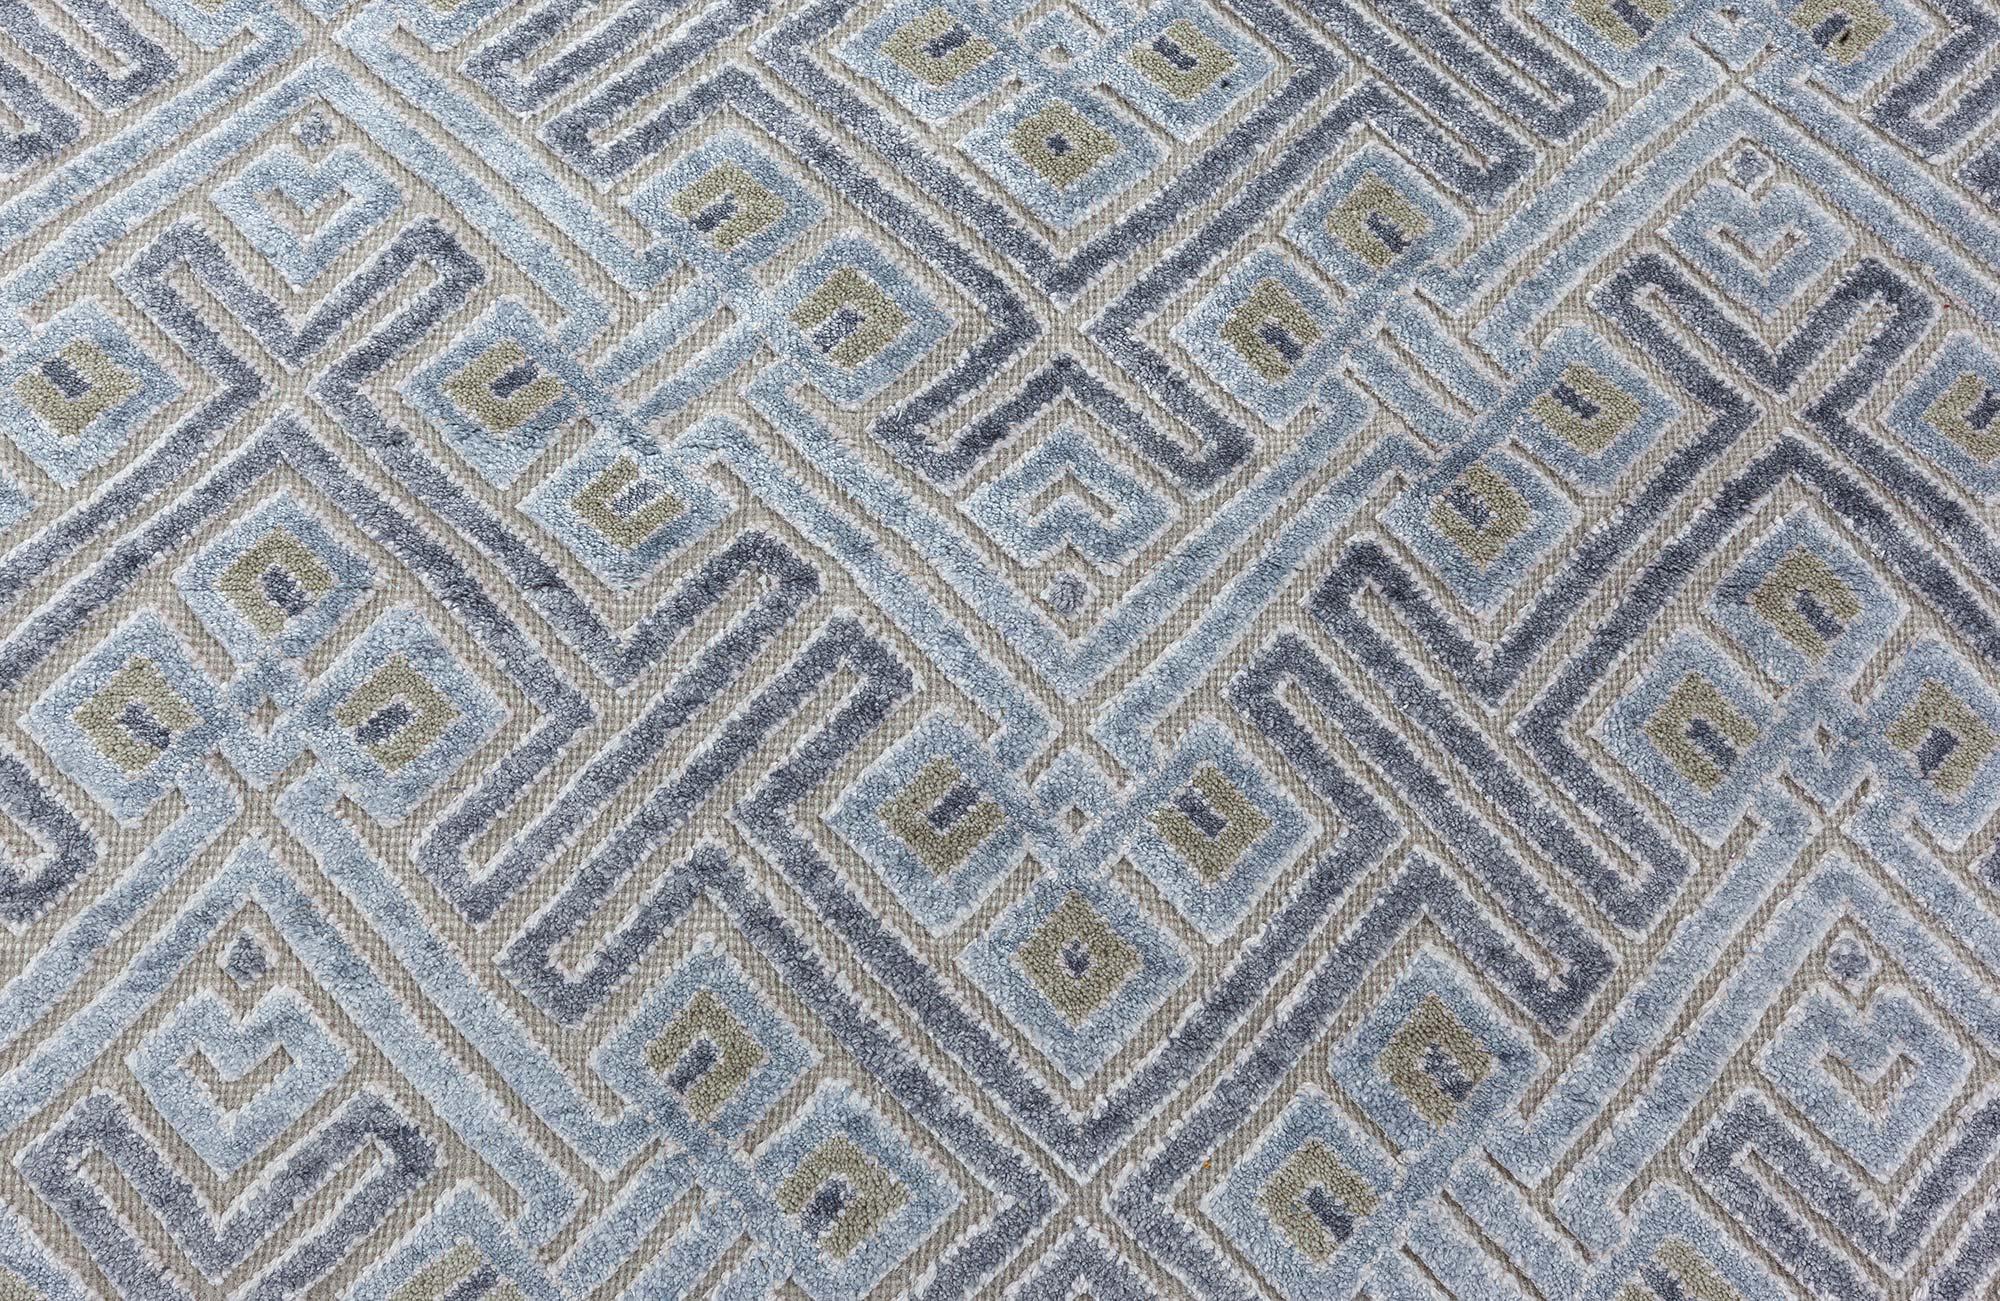 Modern Contemporary Geometric High-Low Knotted Wool Silk Rug by Doris Leslie Blau For Sale